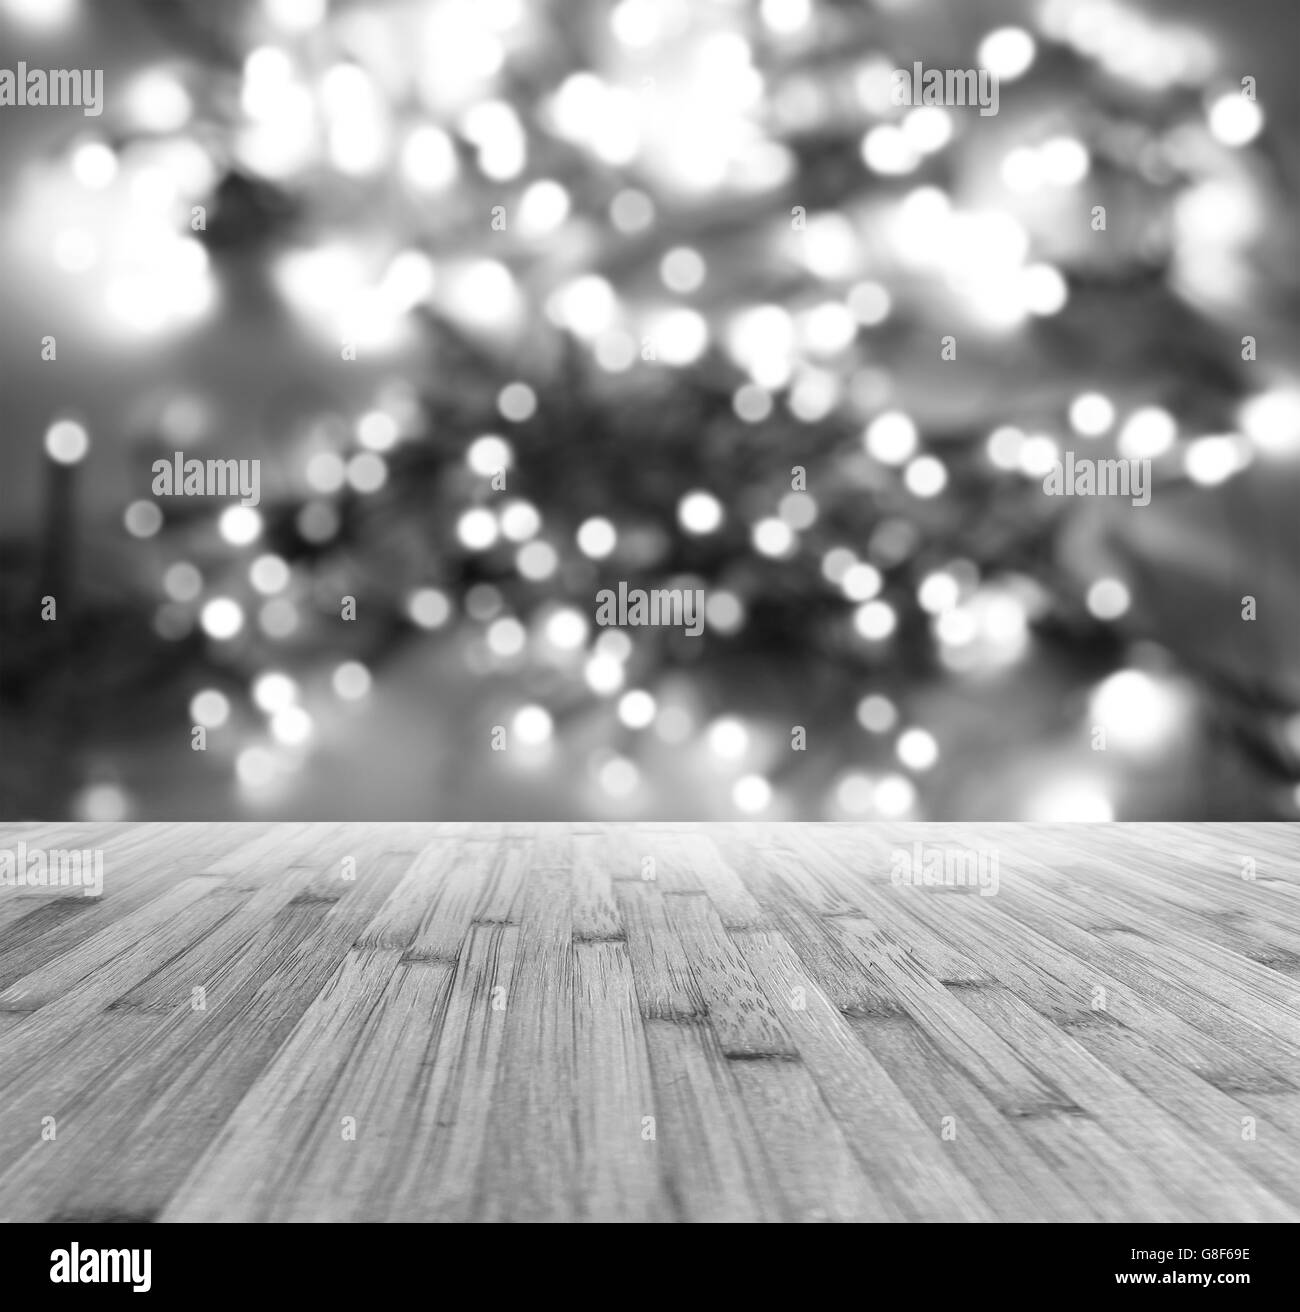 Wooden floor and bright light blurs Stock Photo